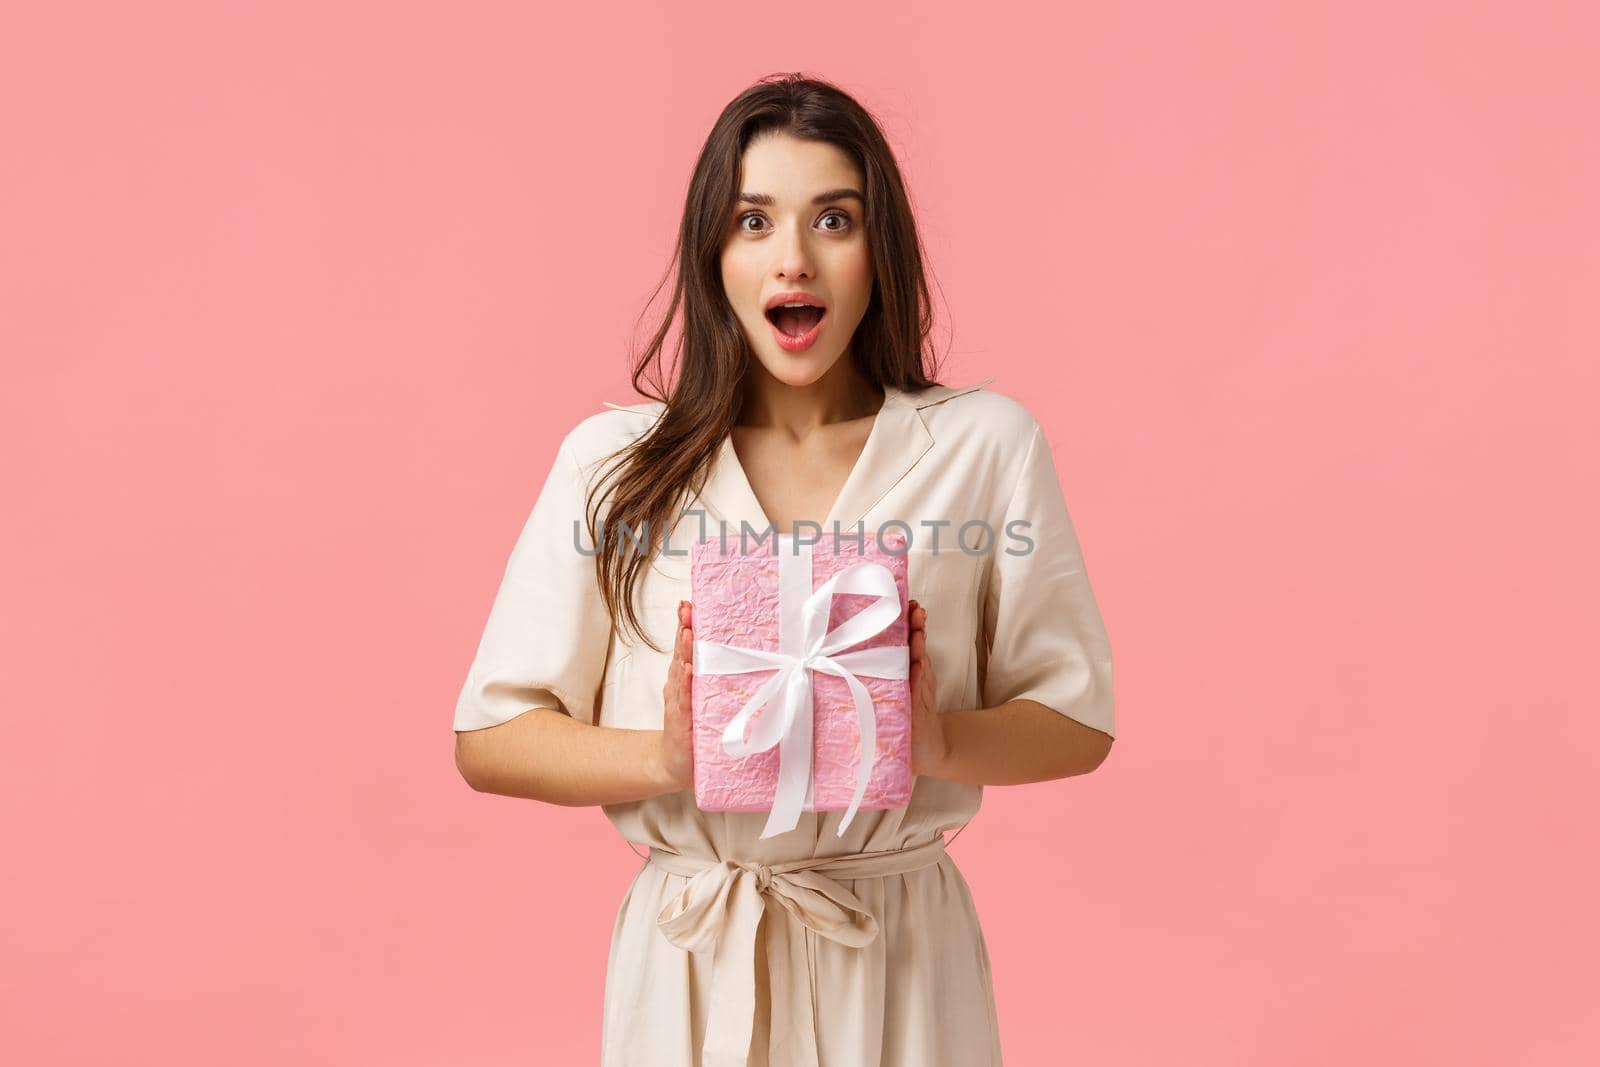 Celebration, happiness and emotions concept. Cheerful young woman receive pleasant gift, holding wrapped present, gasping amazed, open mouth and looked fascinated, pink background.